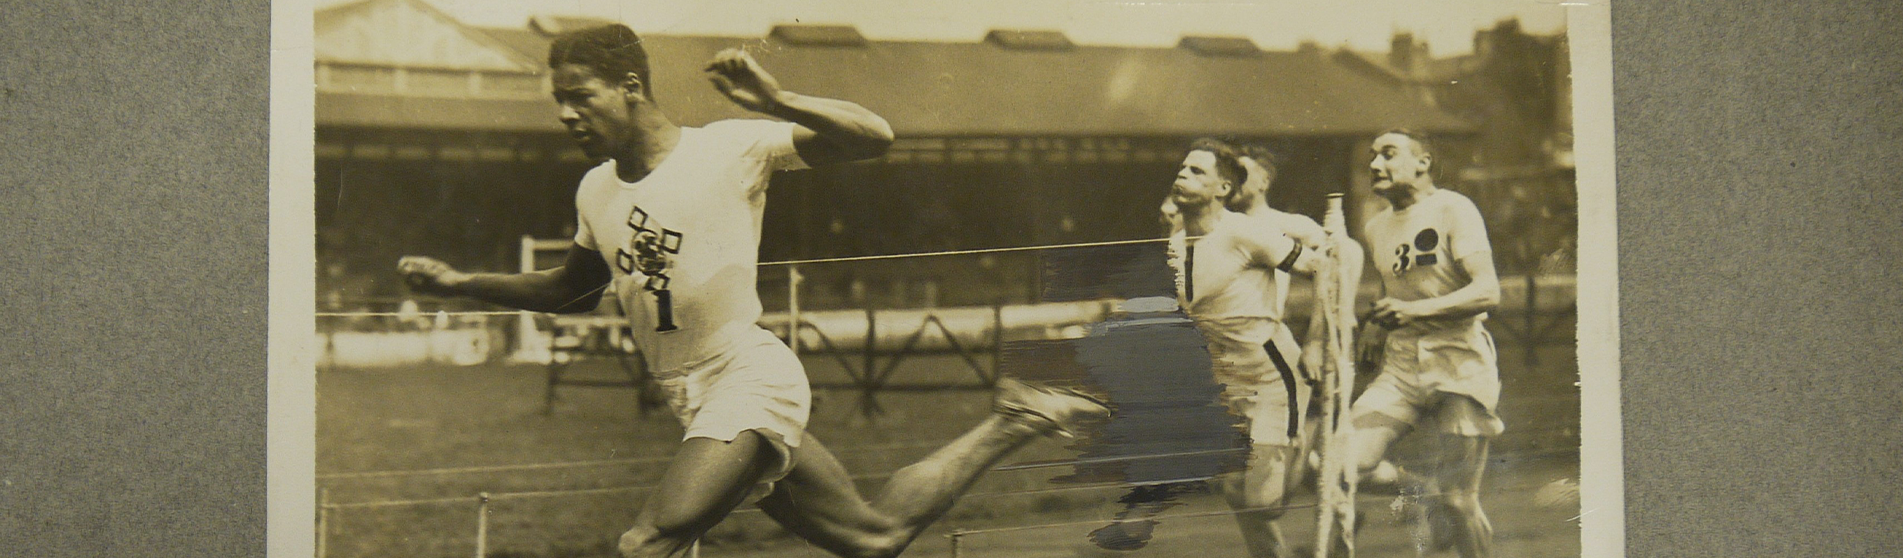 A black and white photograph of four men competing in the 100 yards race.